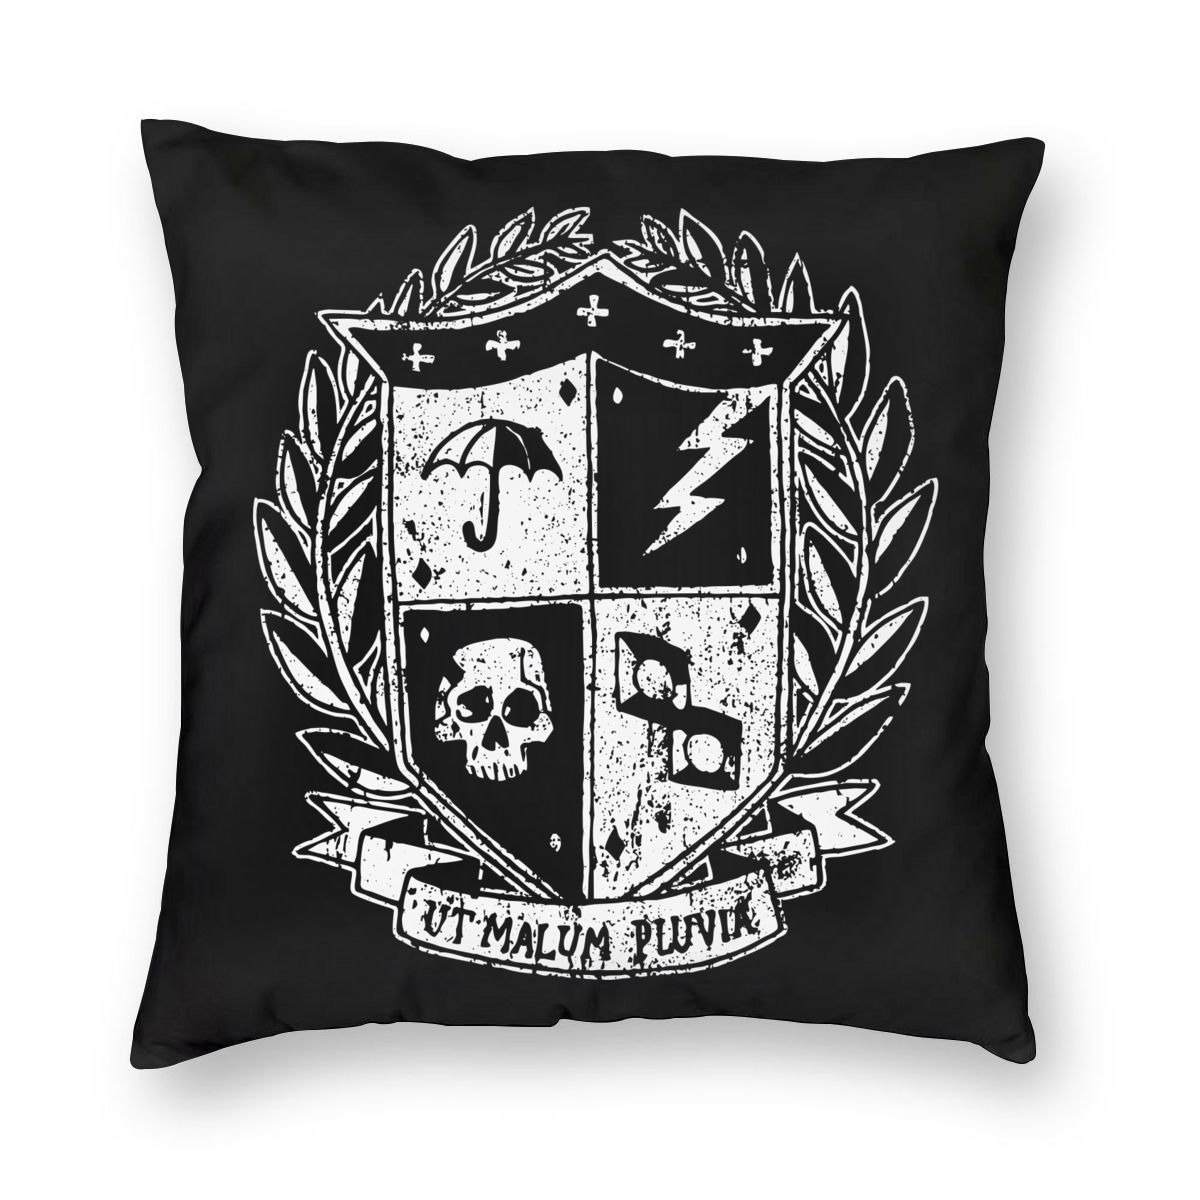 Unique Pillowcase Decorative with print of Umbrella Academy / Pillows with Double-sided Printing - HARD'N'HEAVY